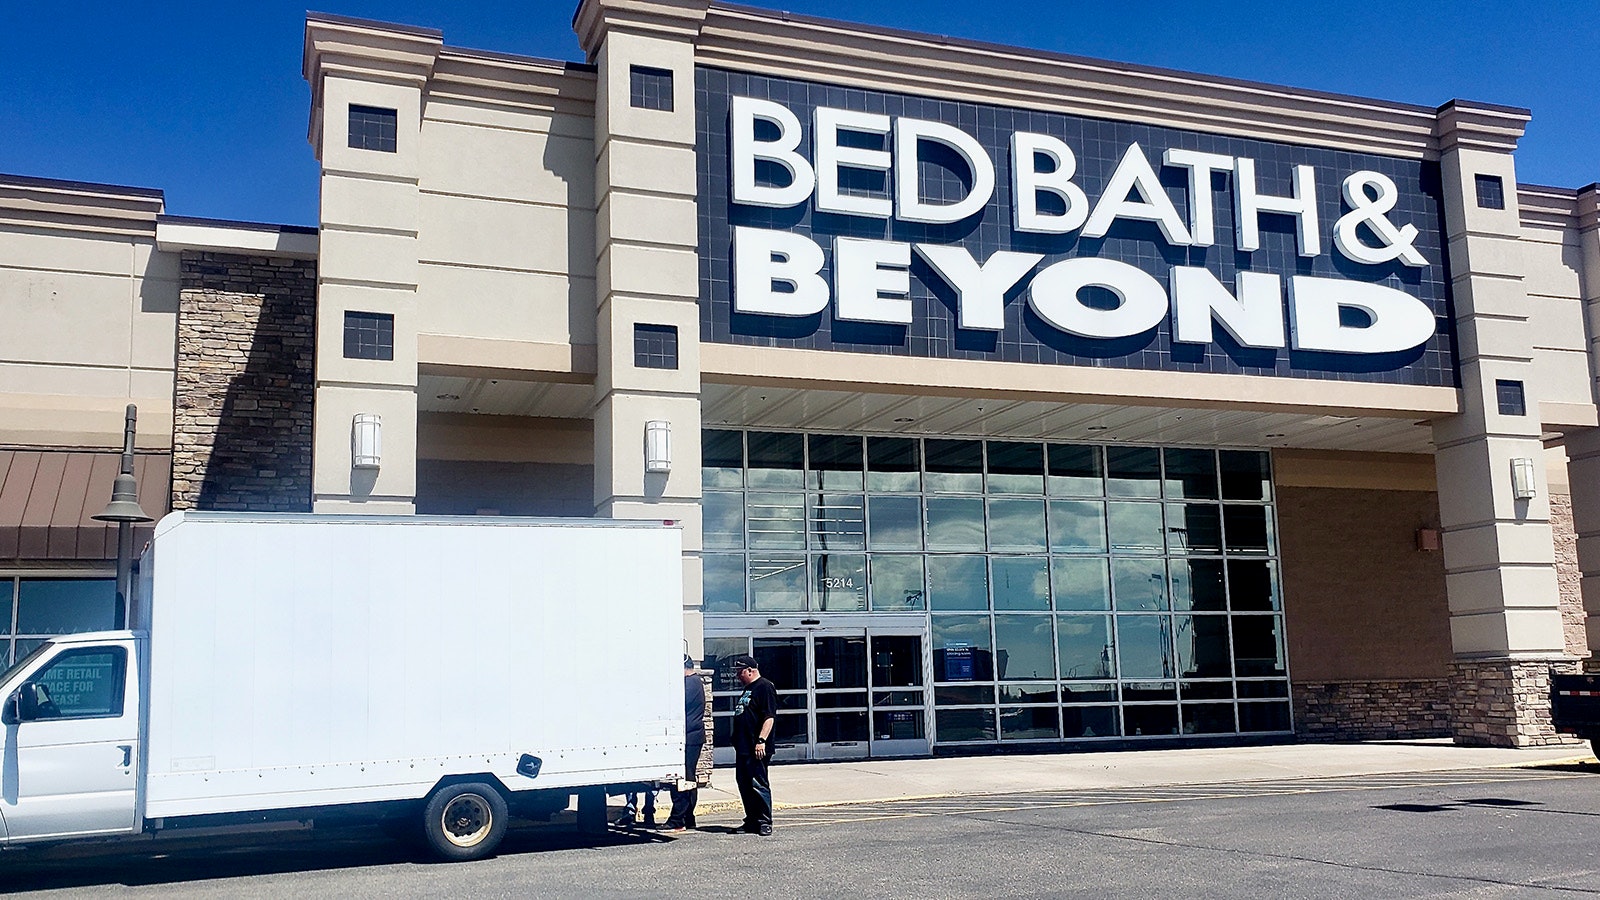 The Cheyenne Bed Bath & Beyond store didn't open Monday after the company filed for Chapter 11 bankruptcy protection Sunday.